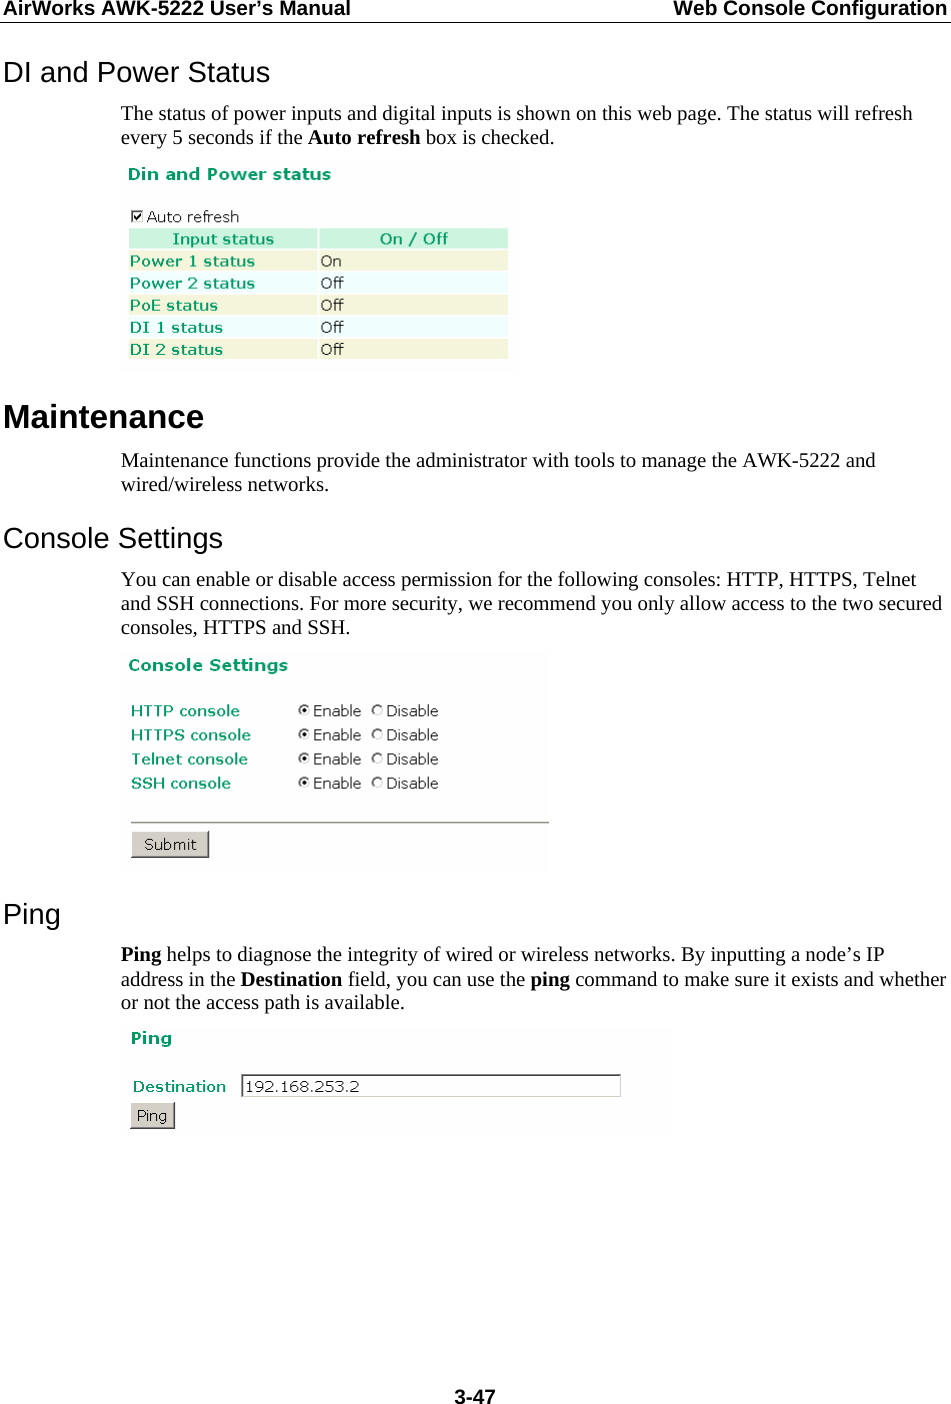 AirWorks AWK-5222 User’s Manual  Web Console Configuration  3-47DI and Power Status The status of power inputs and digital inputs is shown on this web page. The status will refresh every 5 seconds if the Auto refresh box is checked.    Maintenance Maintenance functions provide the administrator with tools to manage the AWK-5222 and wired/wireless networks. Console Settings You can enable or disable access permission for the following consoles: HTTP, HTTPS, Telnet and SSH connections. For more security, we recommend you only allow access to the two secured consoles, HTTPS and SSH.  Ping Ping helps to diagnose the integrity of wired or wireless networks. By inputting a node’s IP address in the Destination field, you can use the ping command to make sure it exists and whether or not the access path is available.       